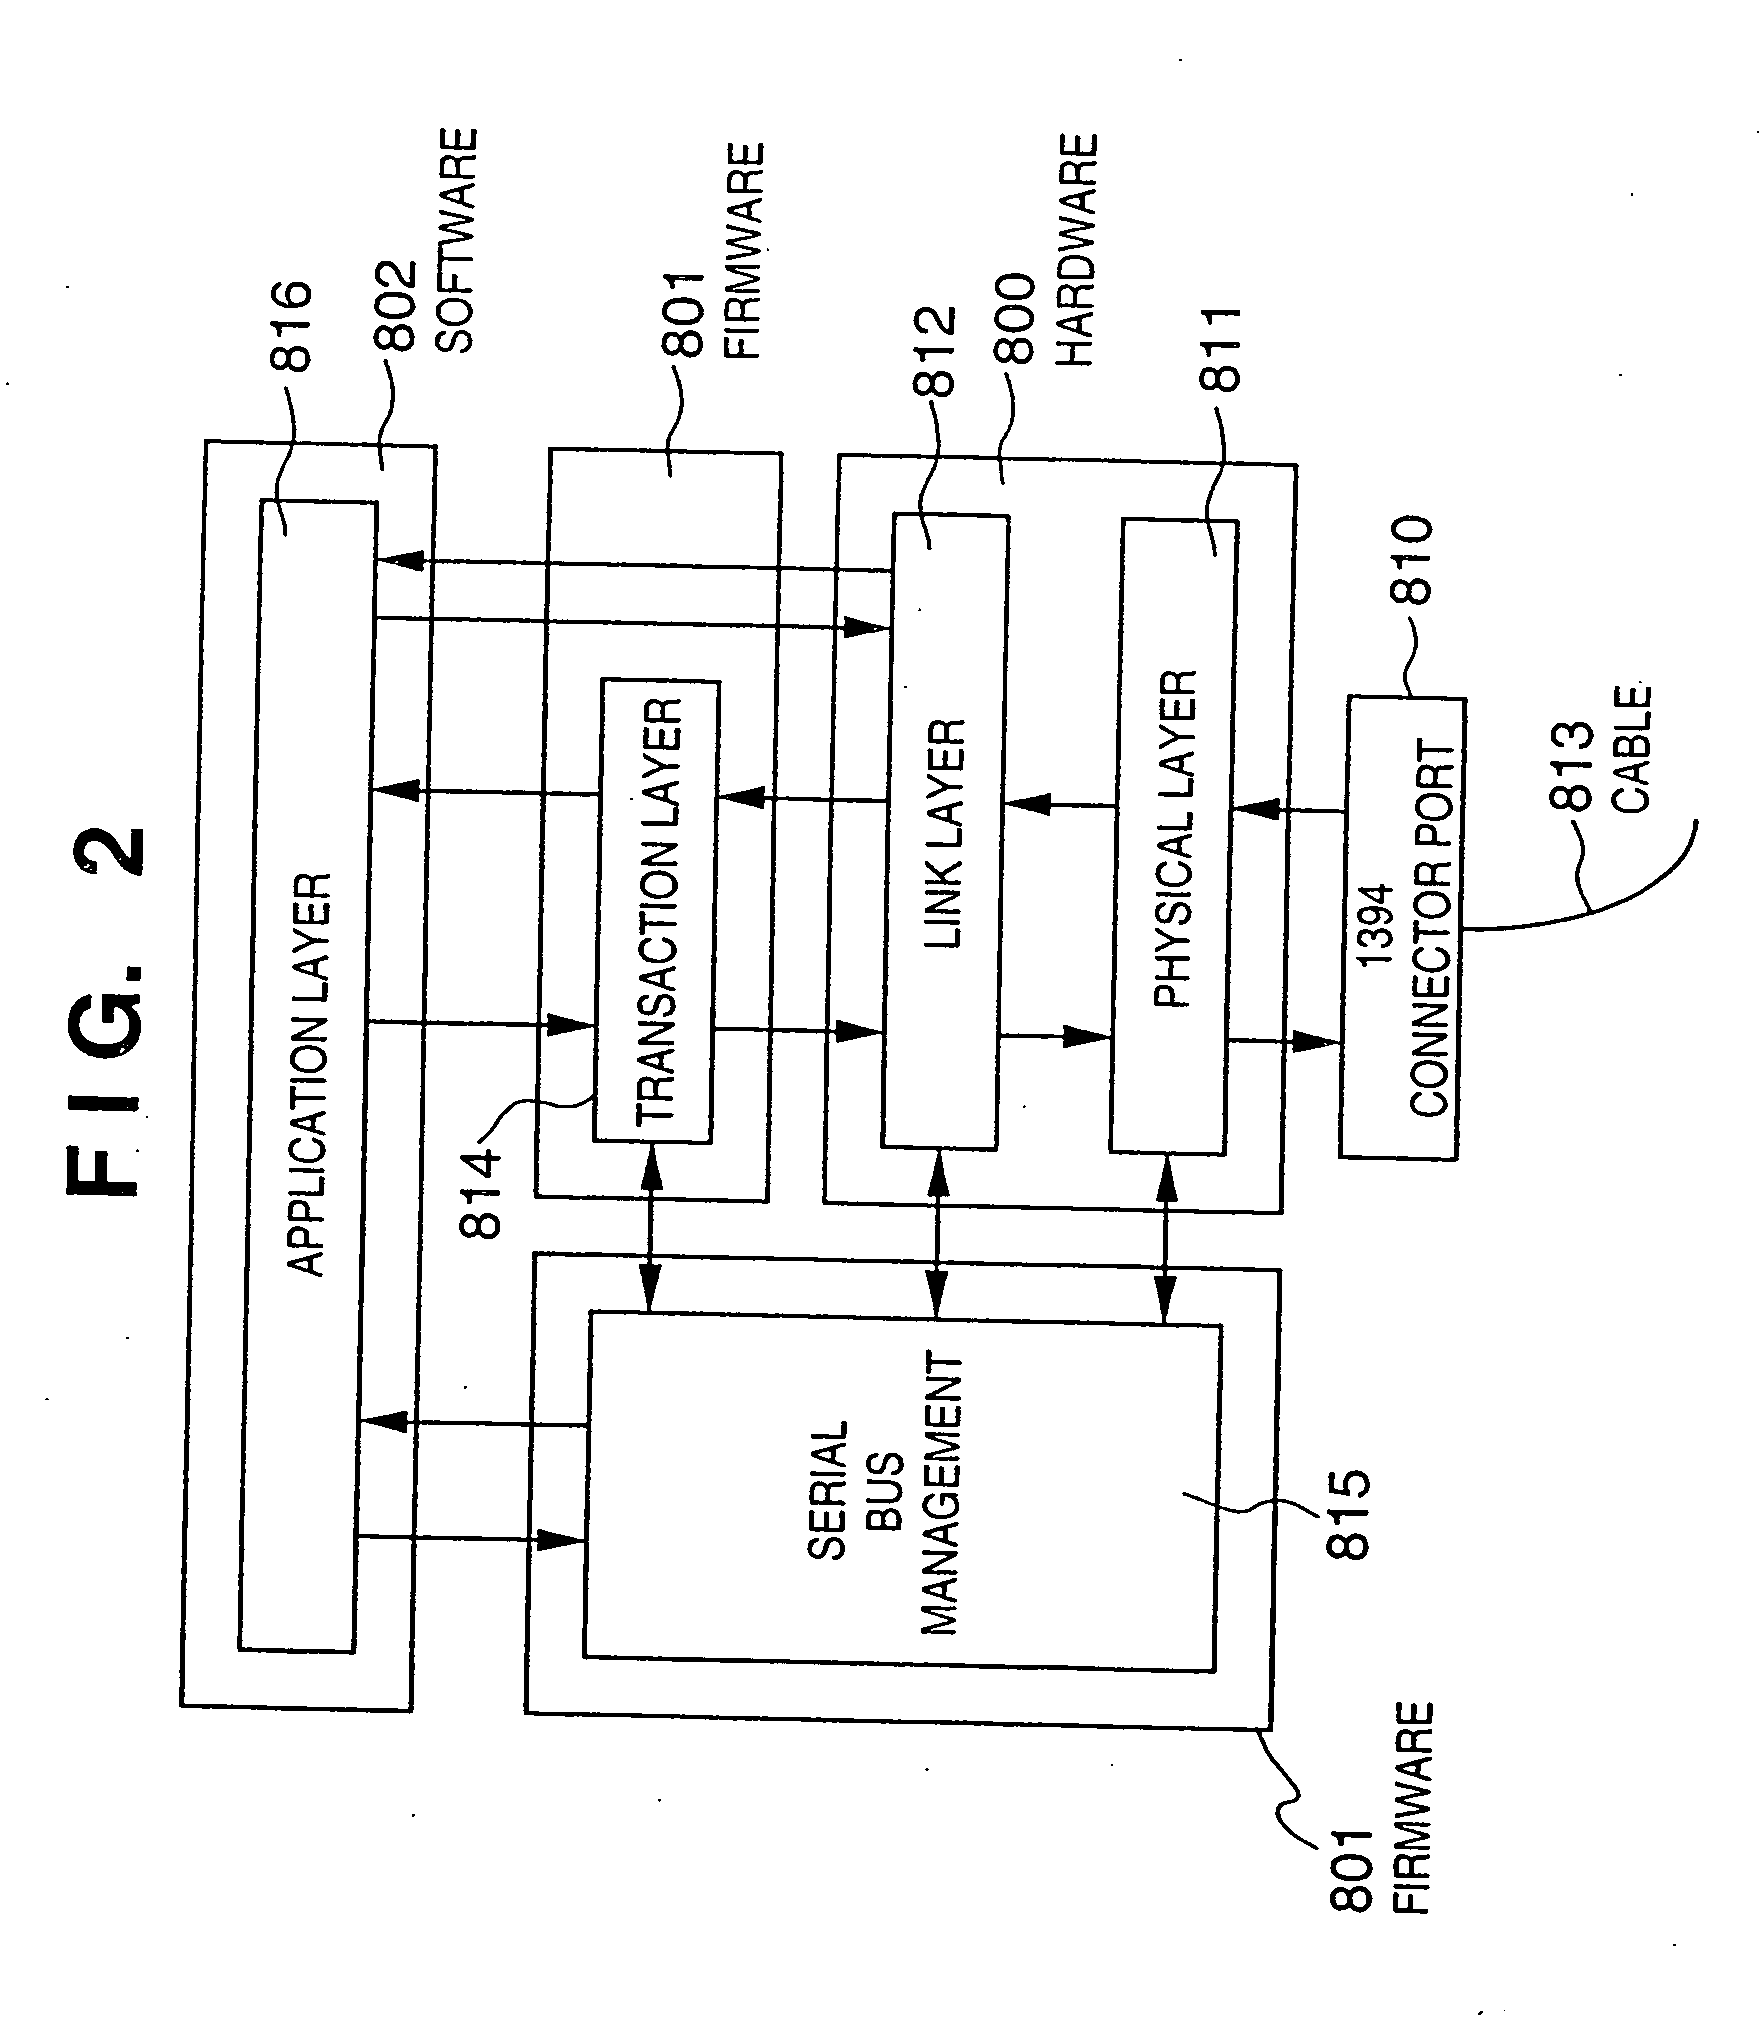 Information processing apparatus and method that utilizes stored information about a mountable device